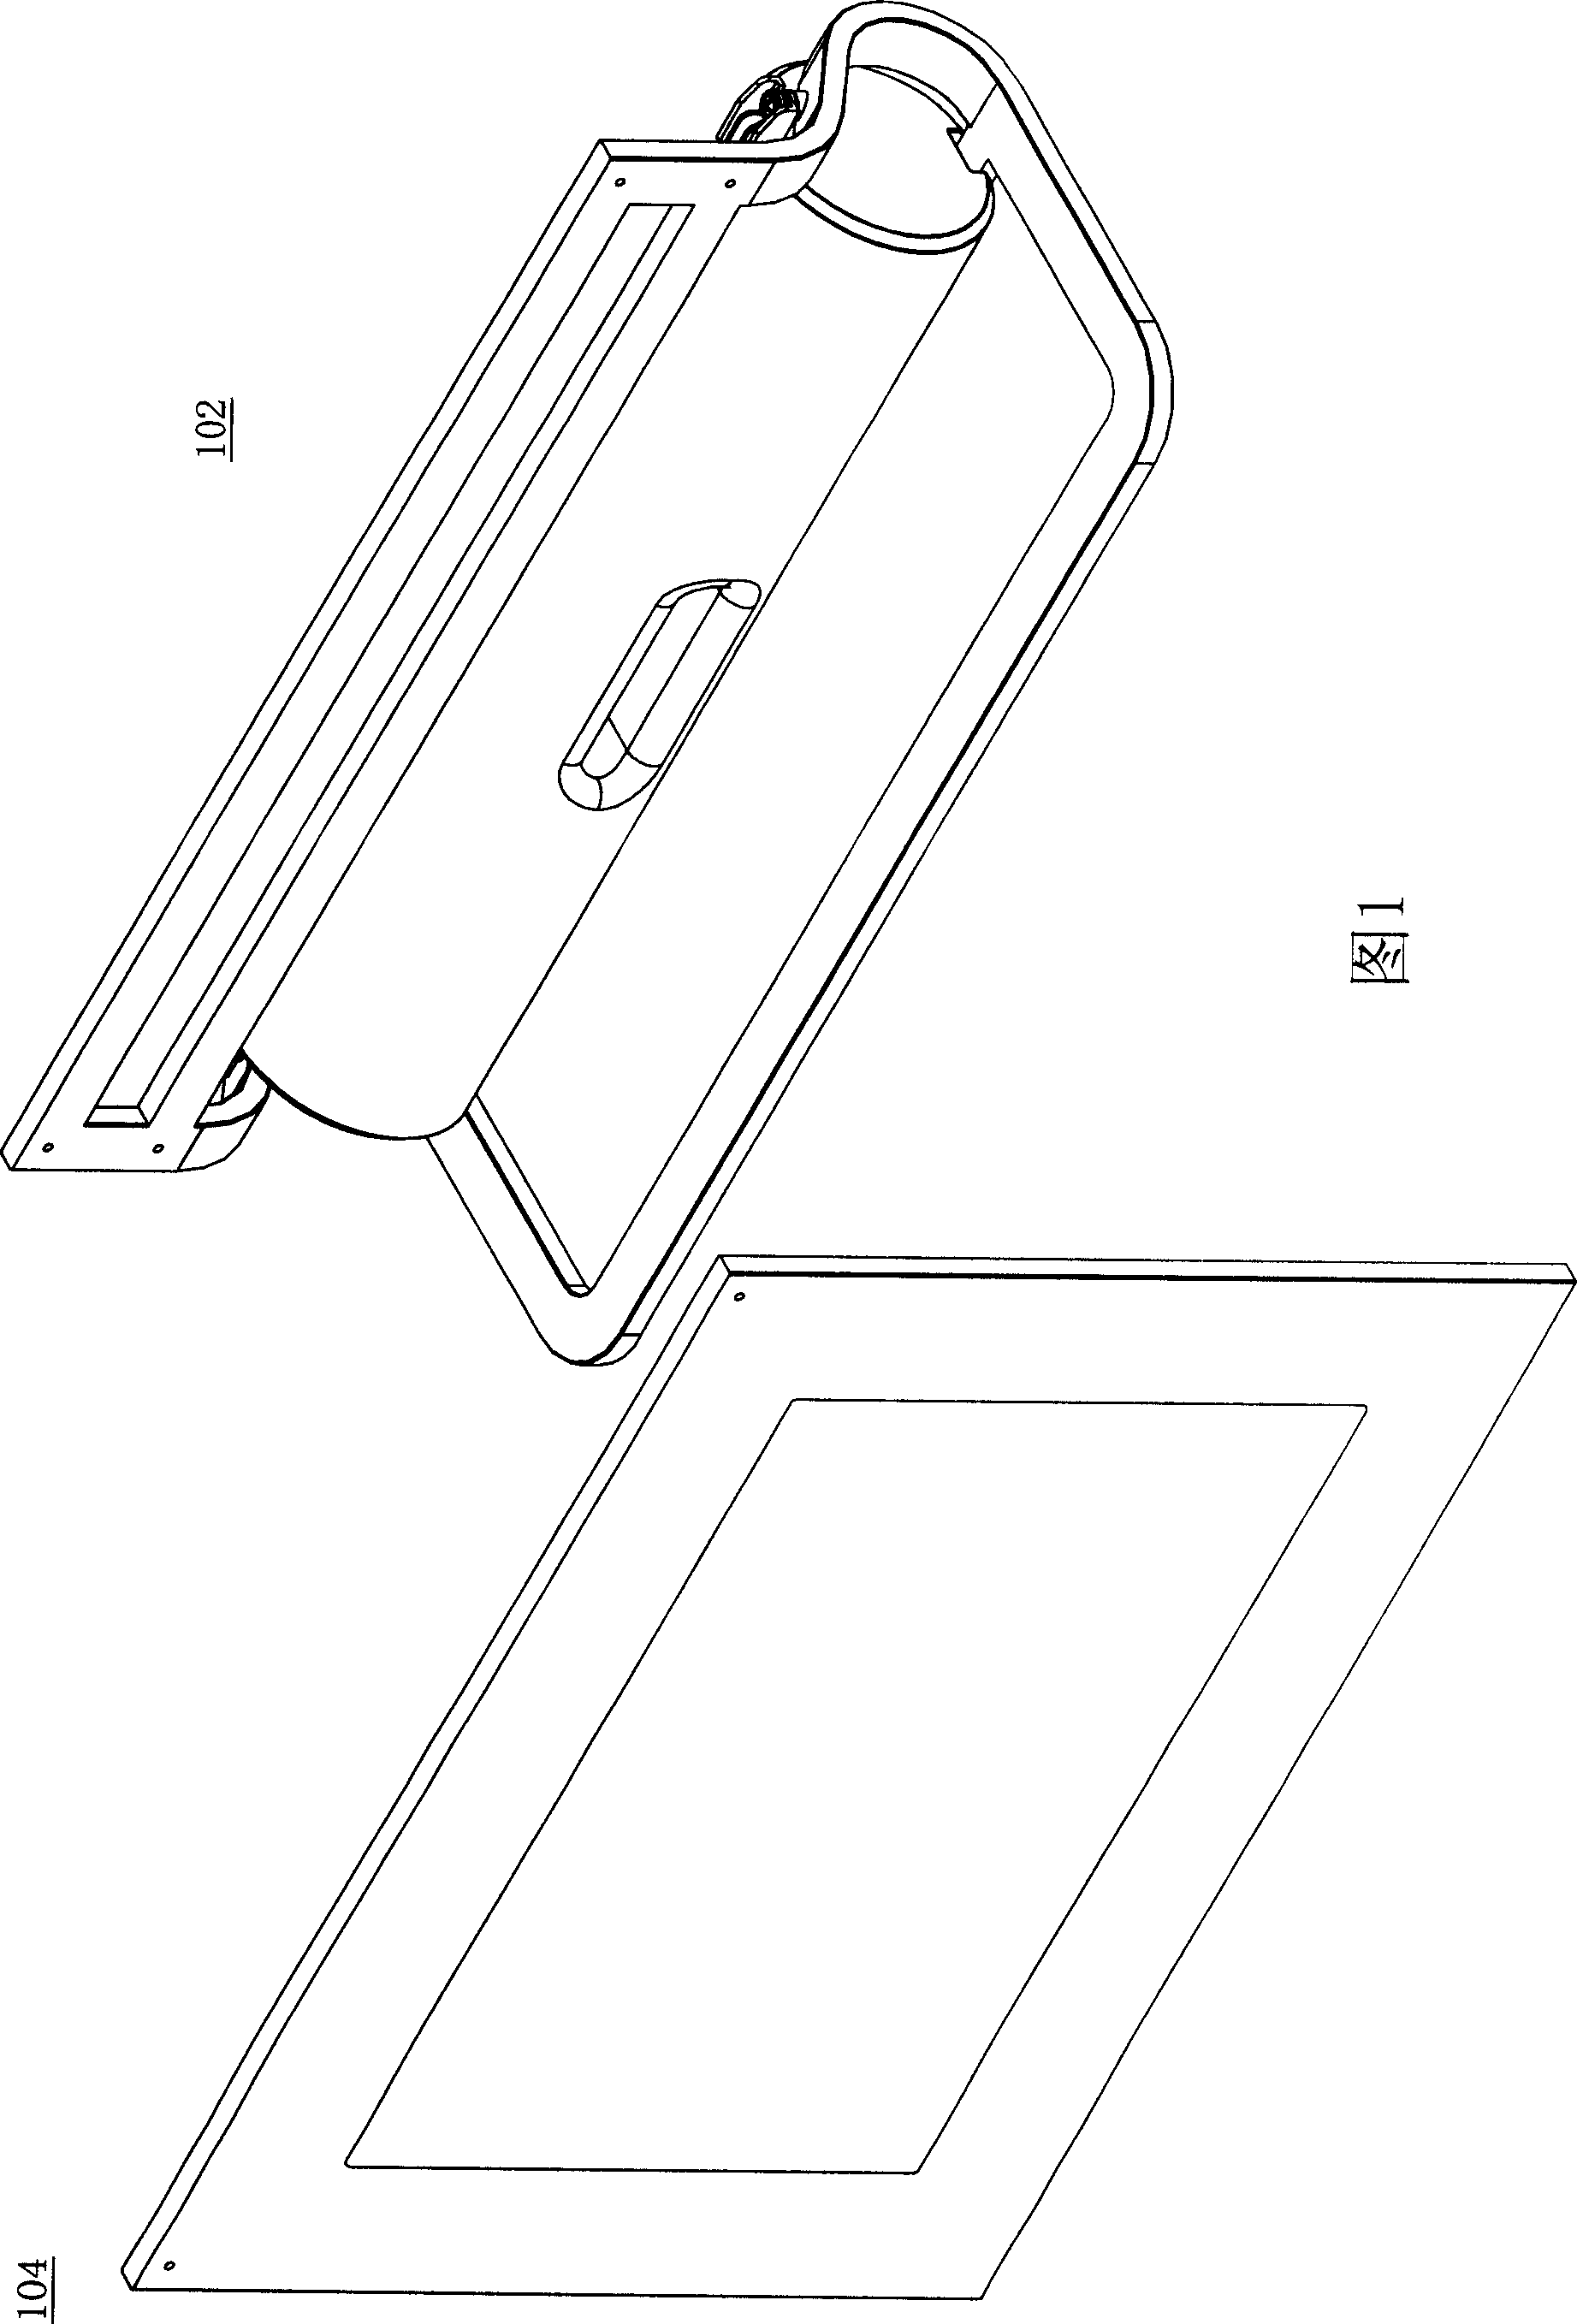 Rack for thin display device with bass horn and bass thin display